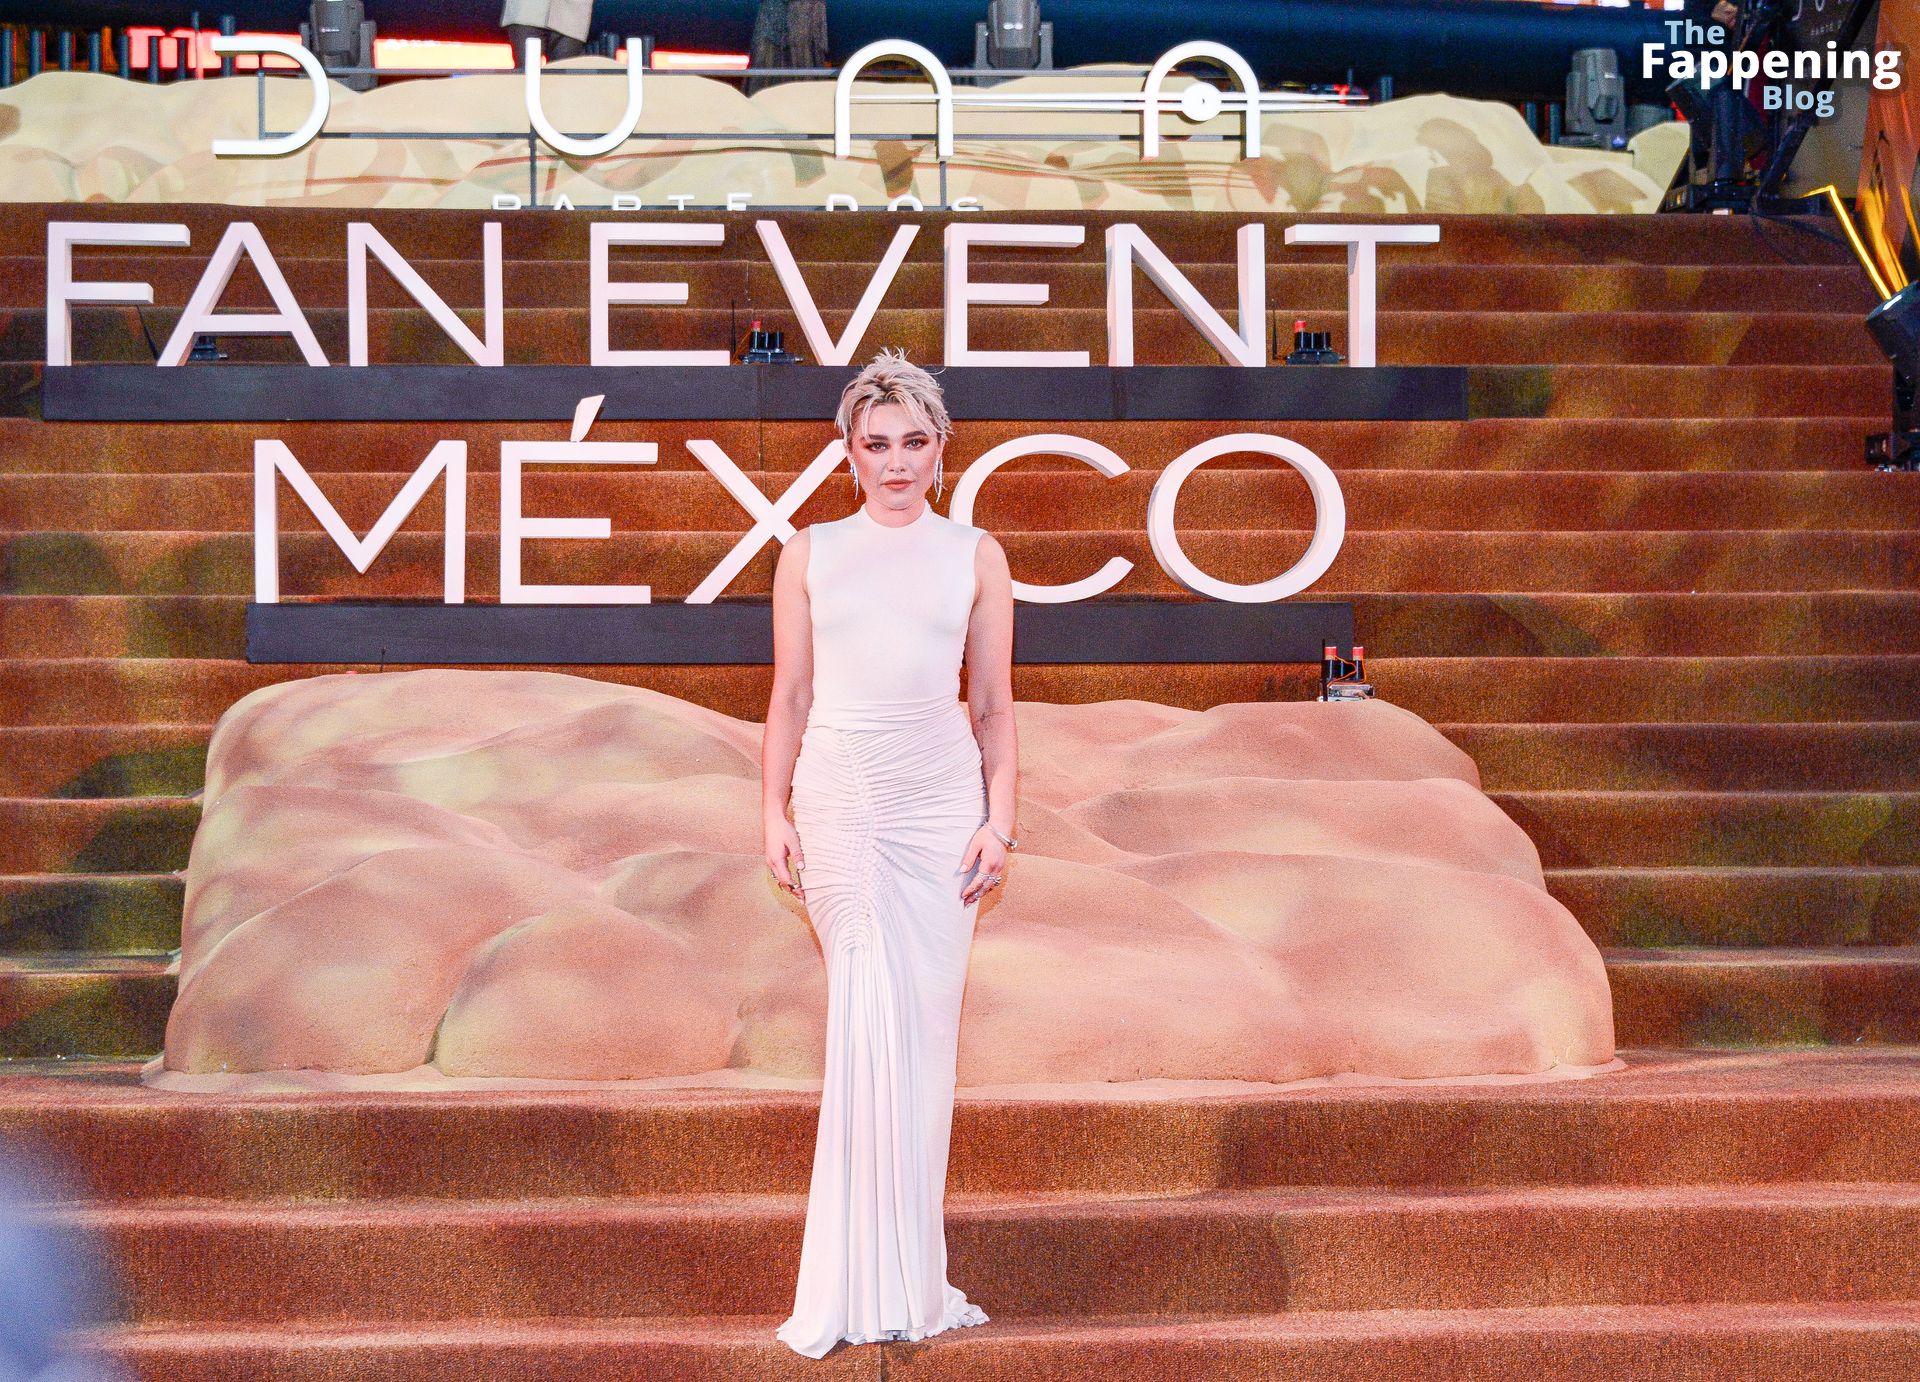 Florence Pugh Shows Off Her Pokies During the Red Carpet of the Film “Dune: Part Two” in Mexico City (160 Photos)